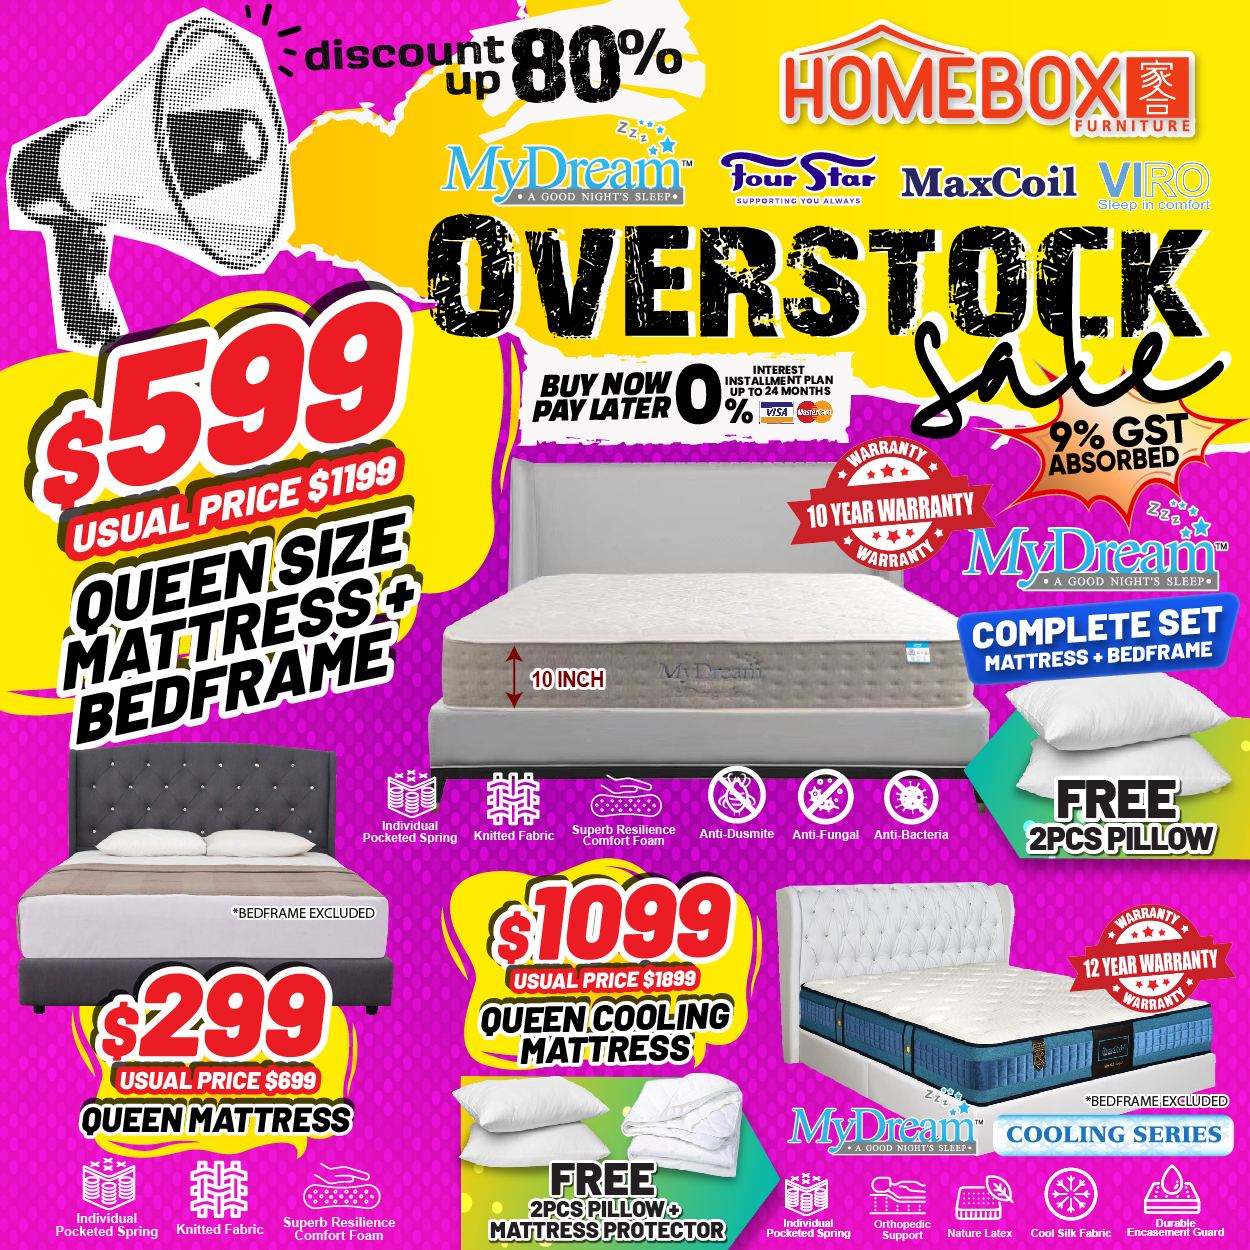 Lobang: Overstock sale at HOMEBOX Furniture @ Aljunied has furniture at up to 80% off from 17 Feb - 3 Mar 24 - 20